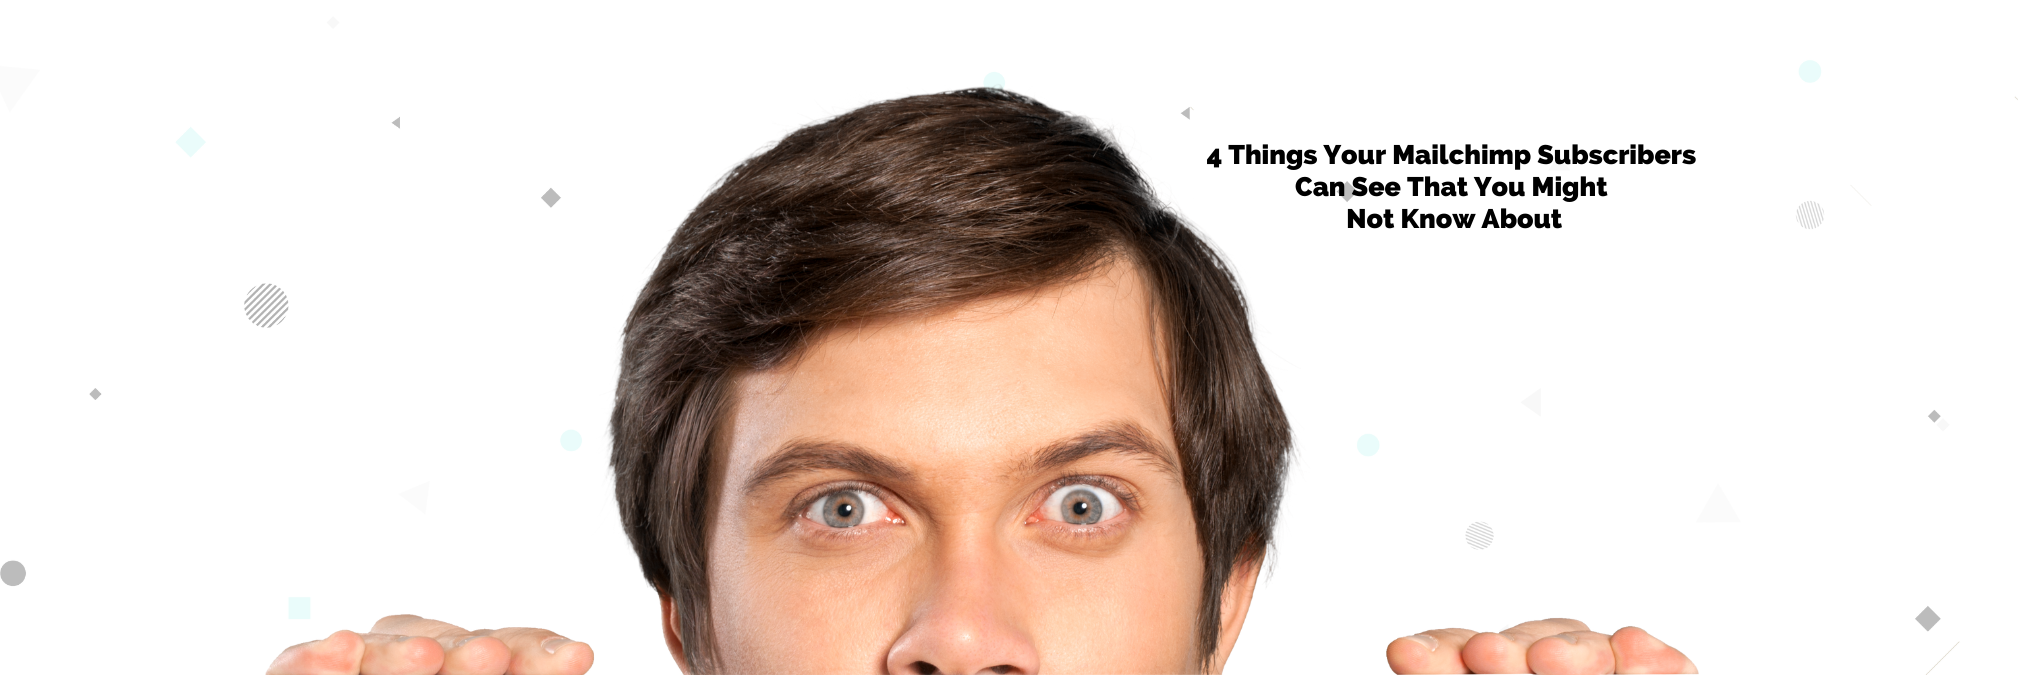 4 Things Your Subscribers Can See